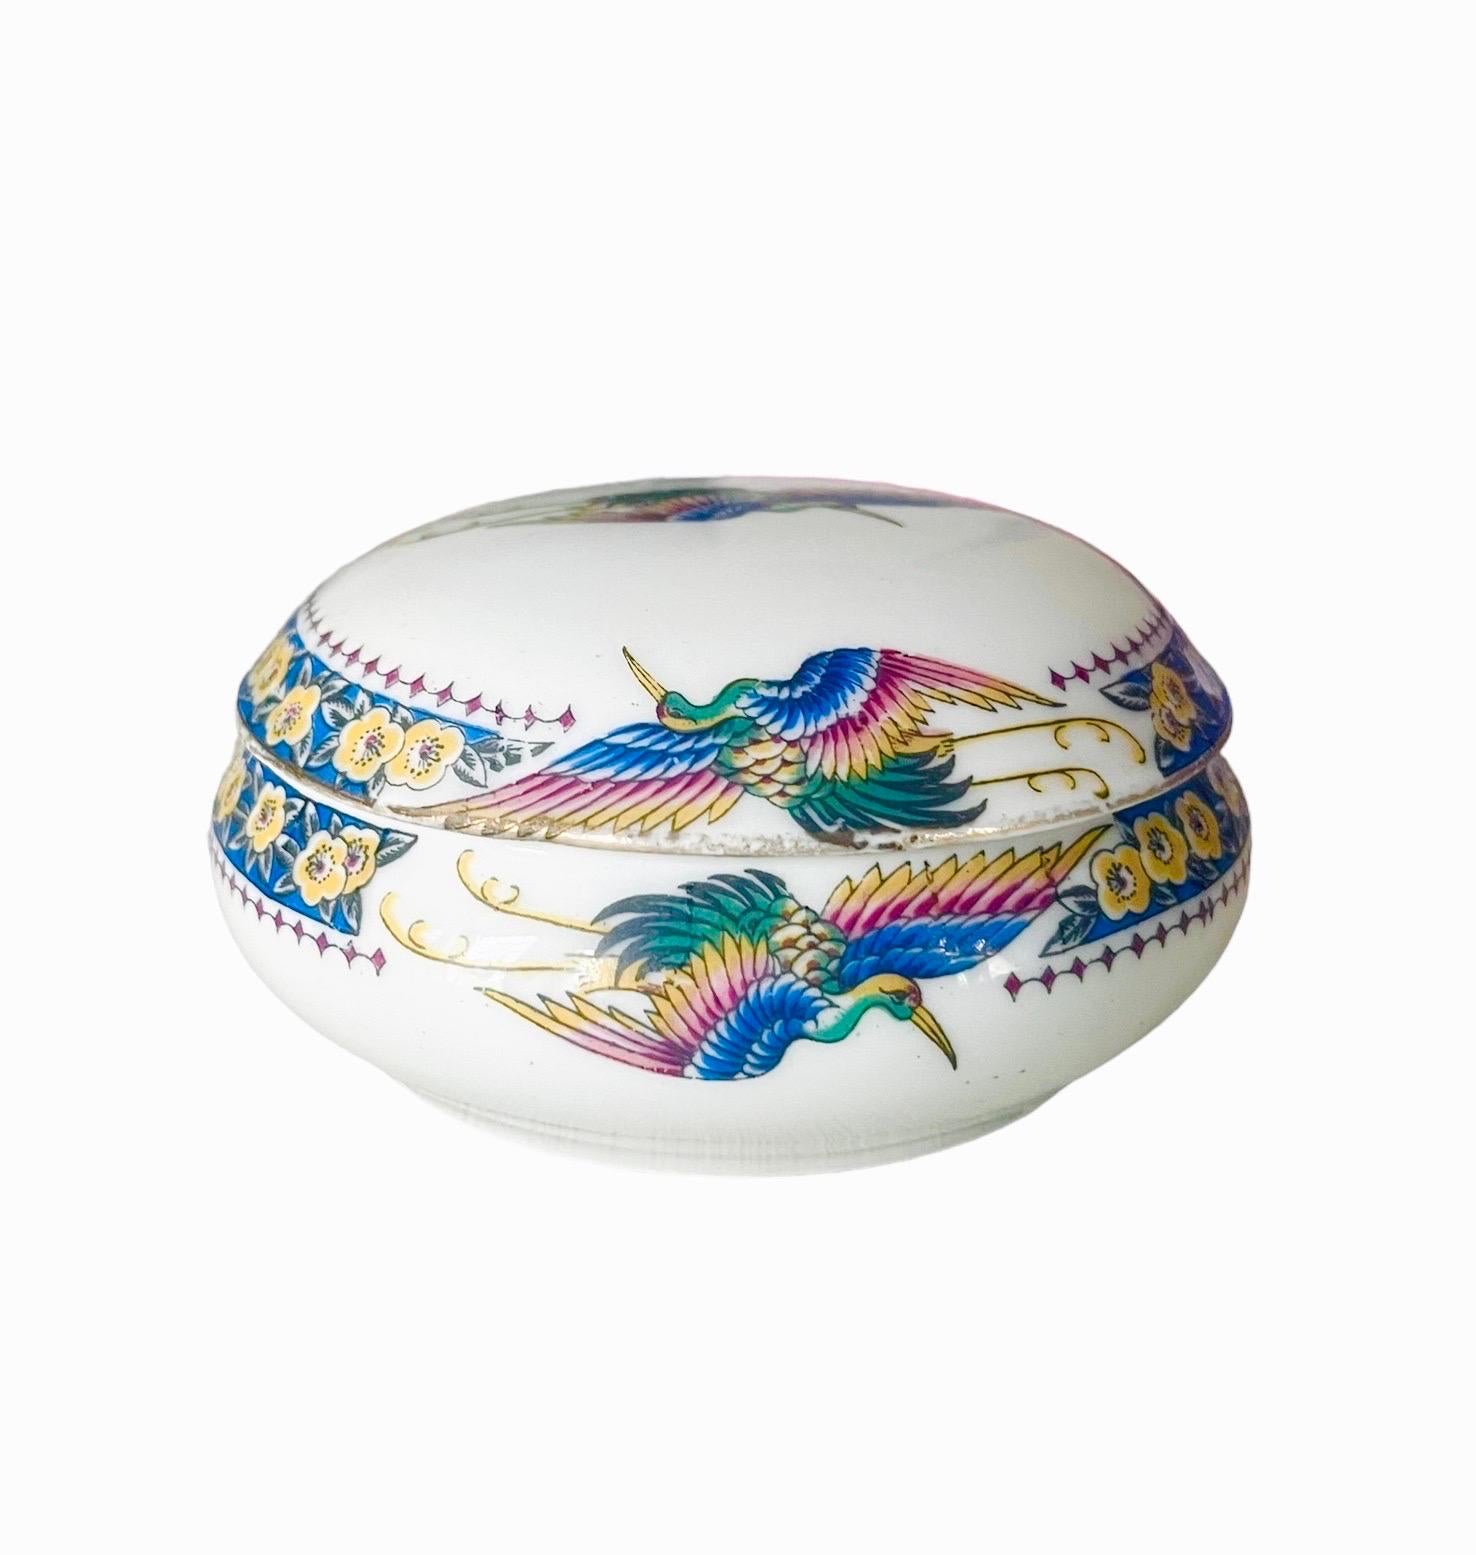 Very pretty and old Box or Candy Box with Lid in Limoges porcelain with Multicolored bird decorations. The birds depicted are peacocks. The edges of the lid and the box are decorated with a blue flower frieze.
The lid is domed which gives the box a